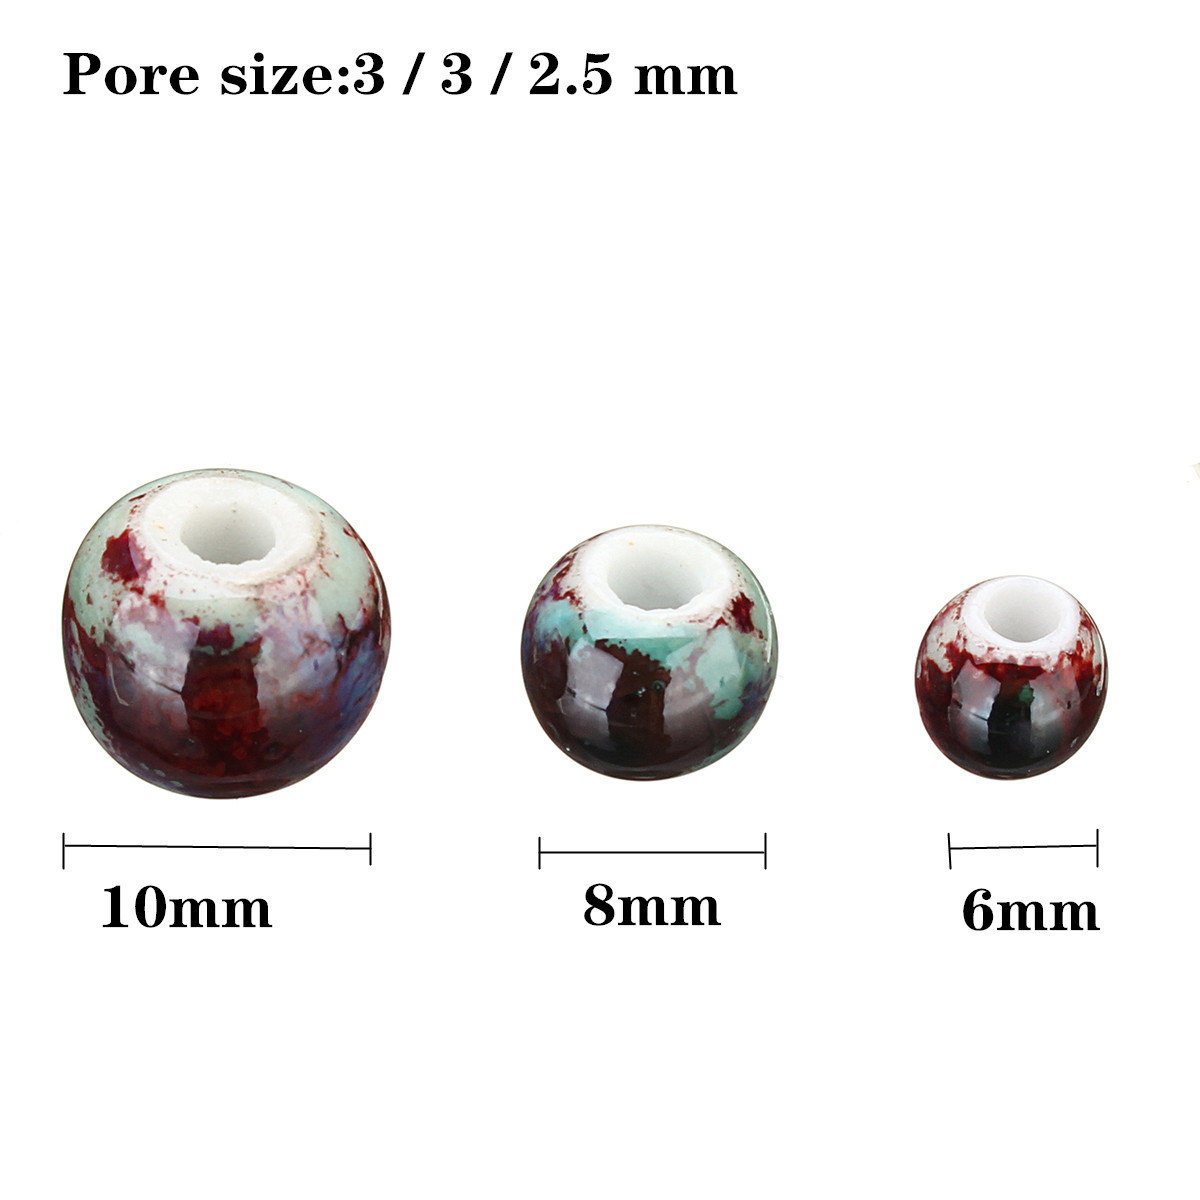 150Pcsset-6810mm-Bead-Ceramic-DIY-Porcelain-String-Spacer-Loose-Round-Jewelry-Craft-Decorations-1546076